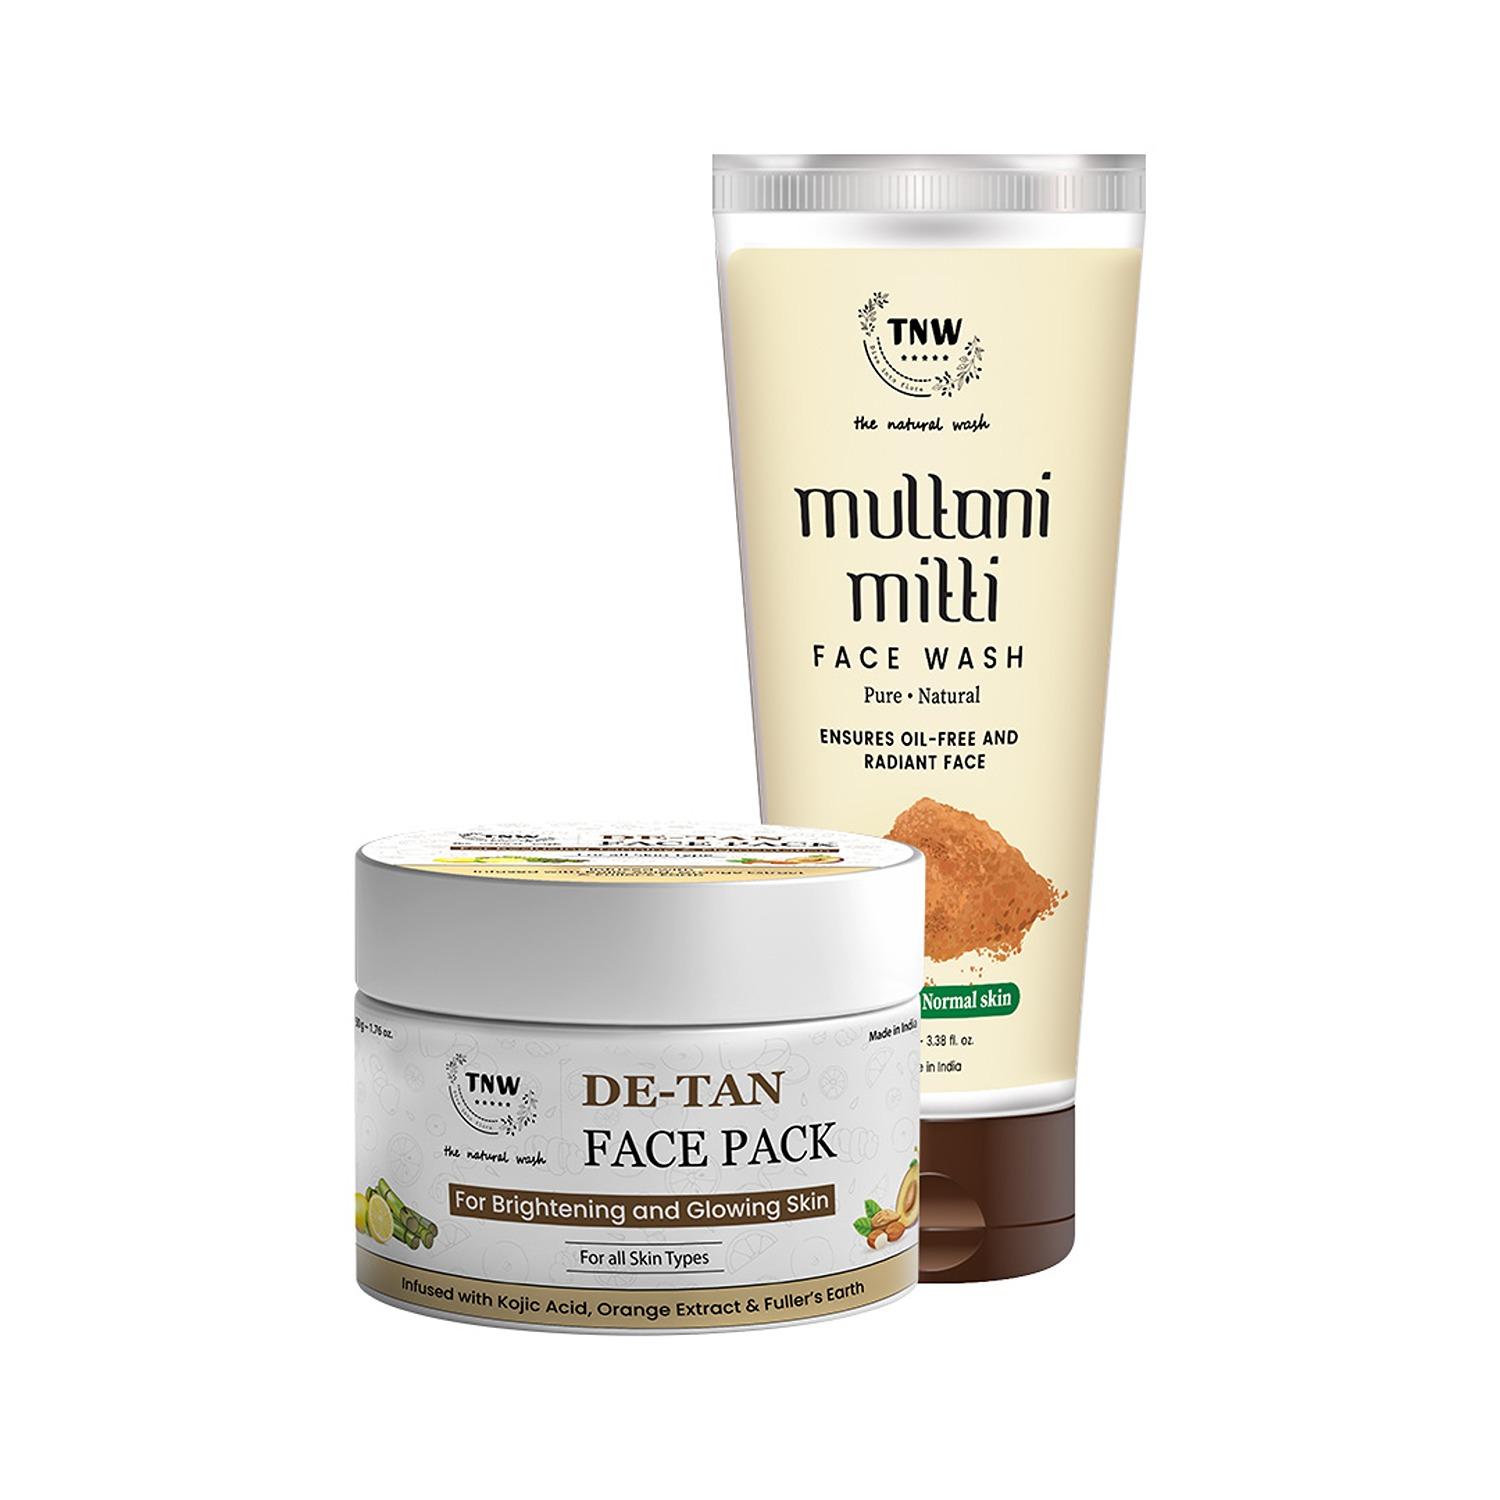 TNW The Natural Wash | TNW The Natural Wash De Tan Face Pack and Multani Mitti Face Wash Combo